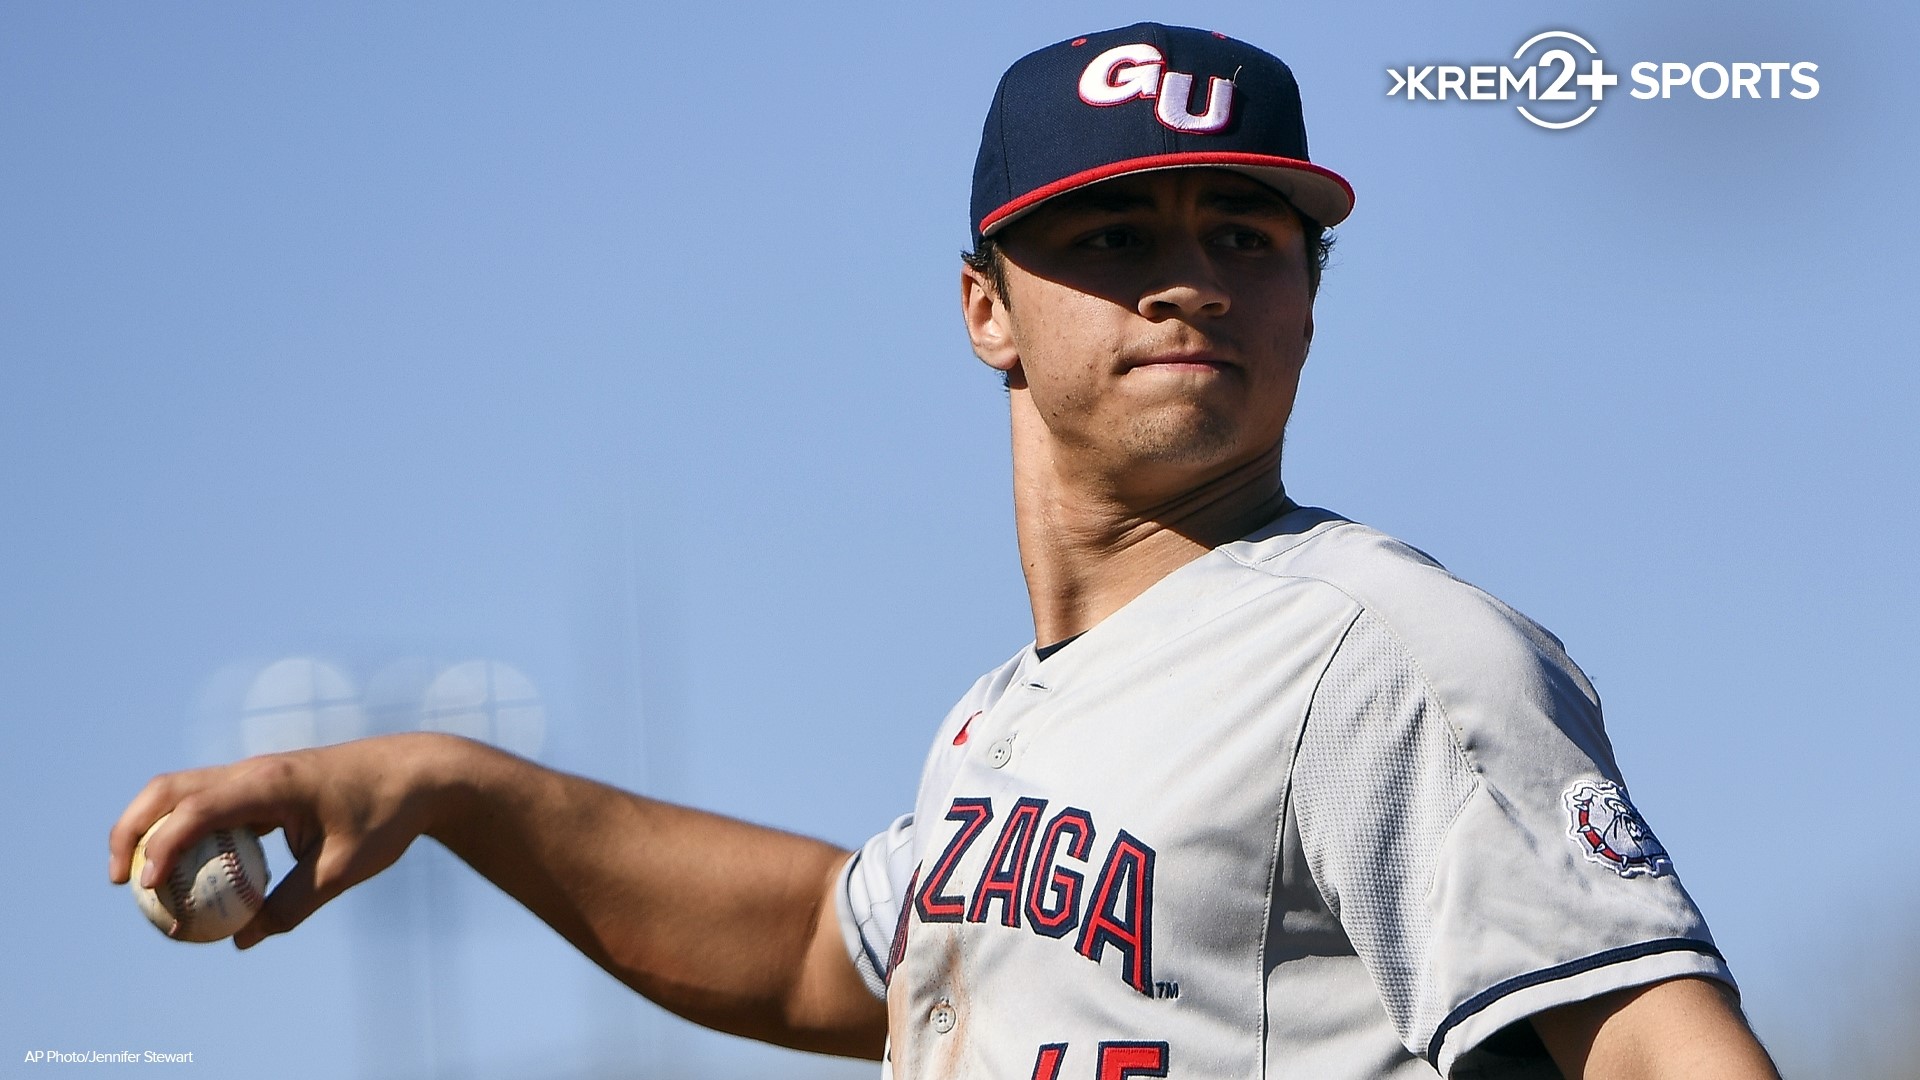 In this extended interview, Gonzaga pitcher Gabriel Hughes talks about hearing his name called in the MLB Draft by the Colorado Rockies